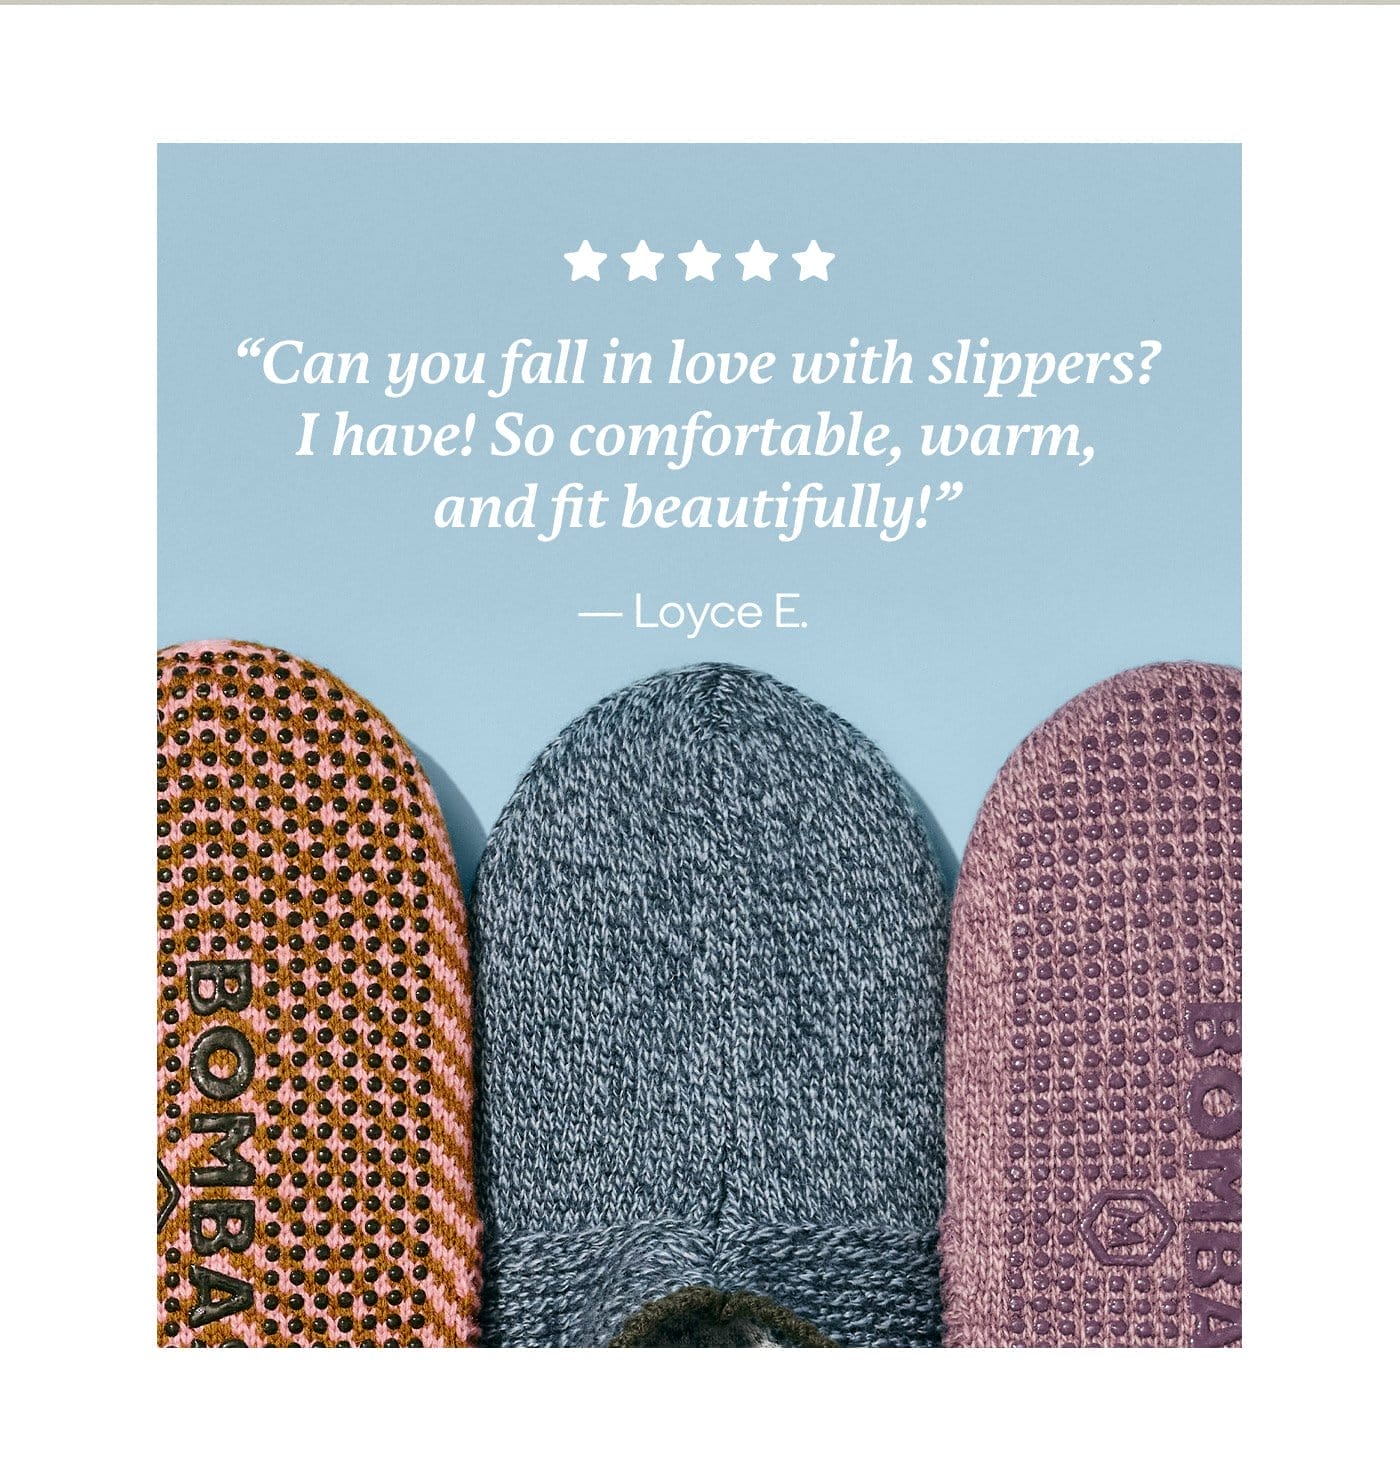 'Can you fall in love with slippers? I have! So comfortable, warm, and fit beautifully!' -Loyce E.